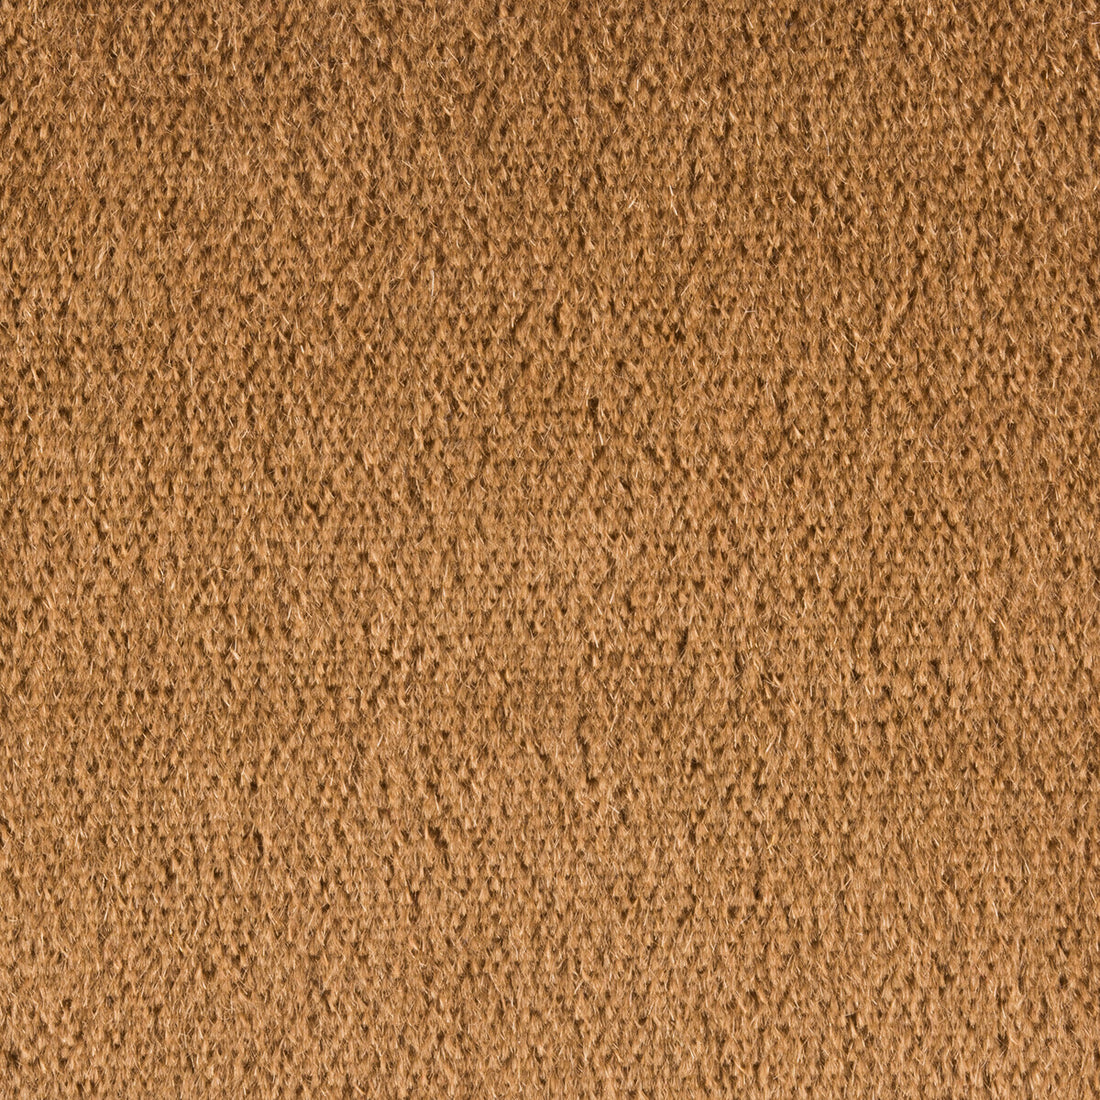 Plazzo Mohair fabric in toffee color - pattern 34259.880.0 - by Kravet Couture